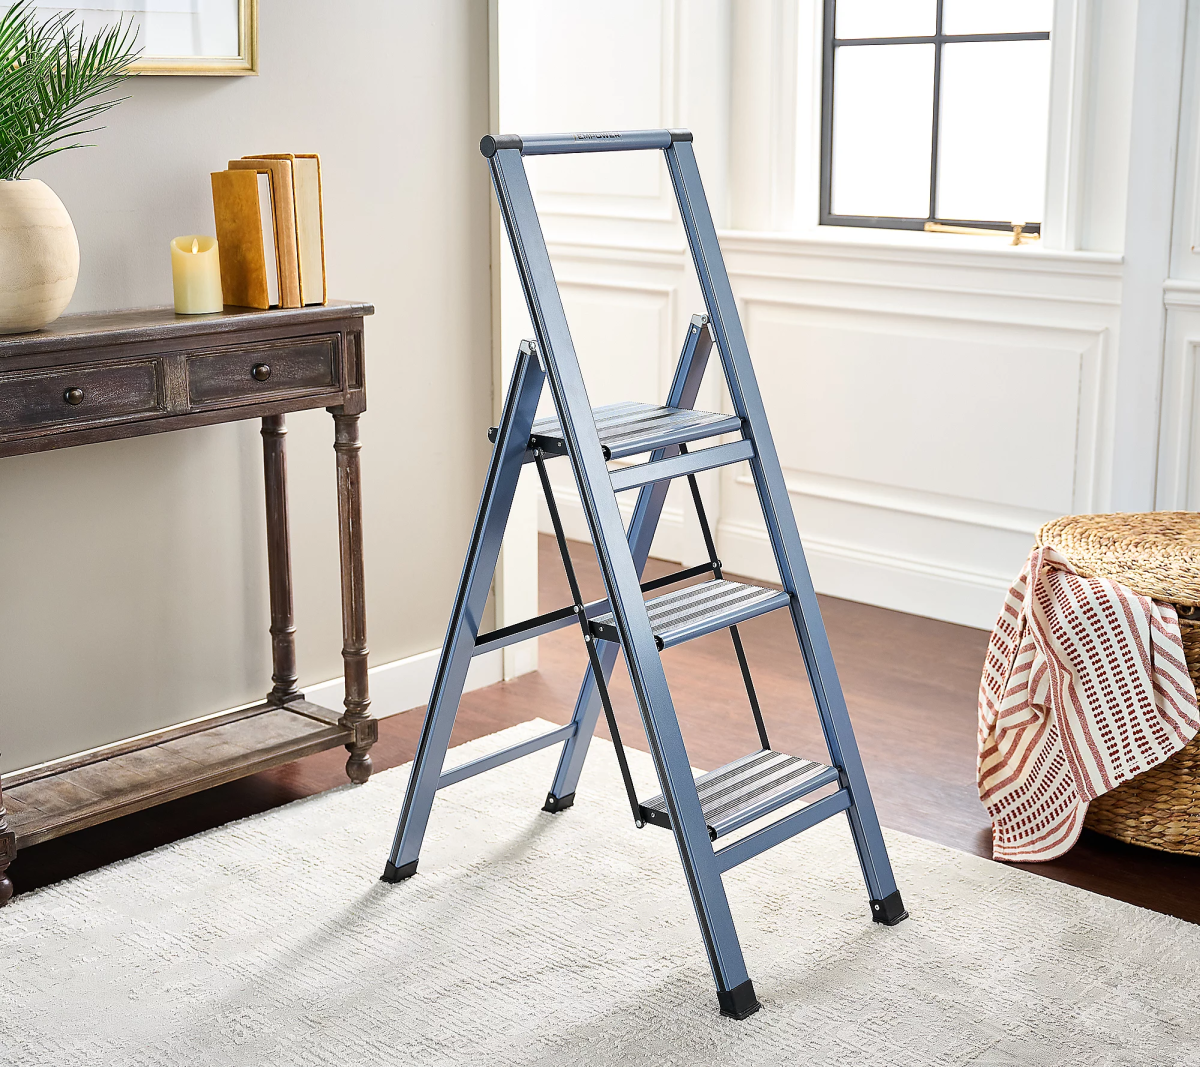 This Lightweight Step Ladder is Ultra-Slim & So Pretty – Just $44.46 Shipped (Reg. $75)